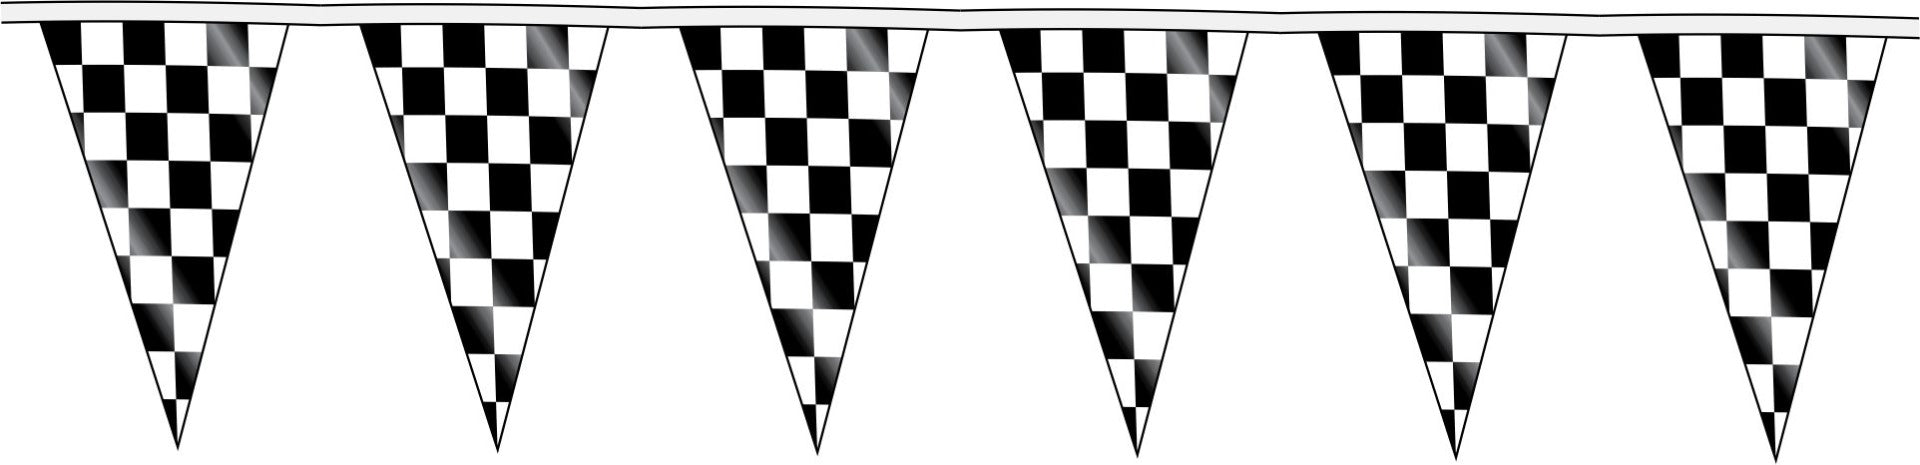 Checkered Pennant String